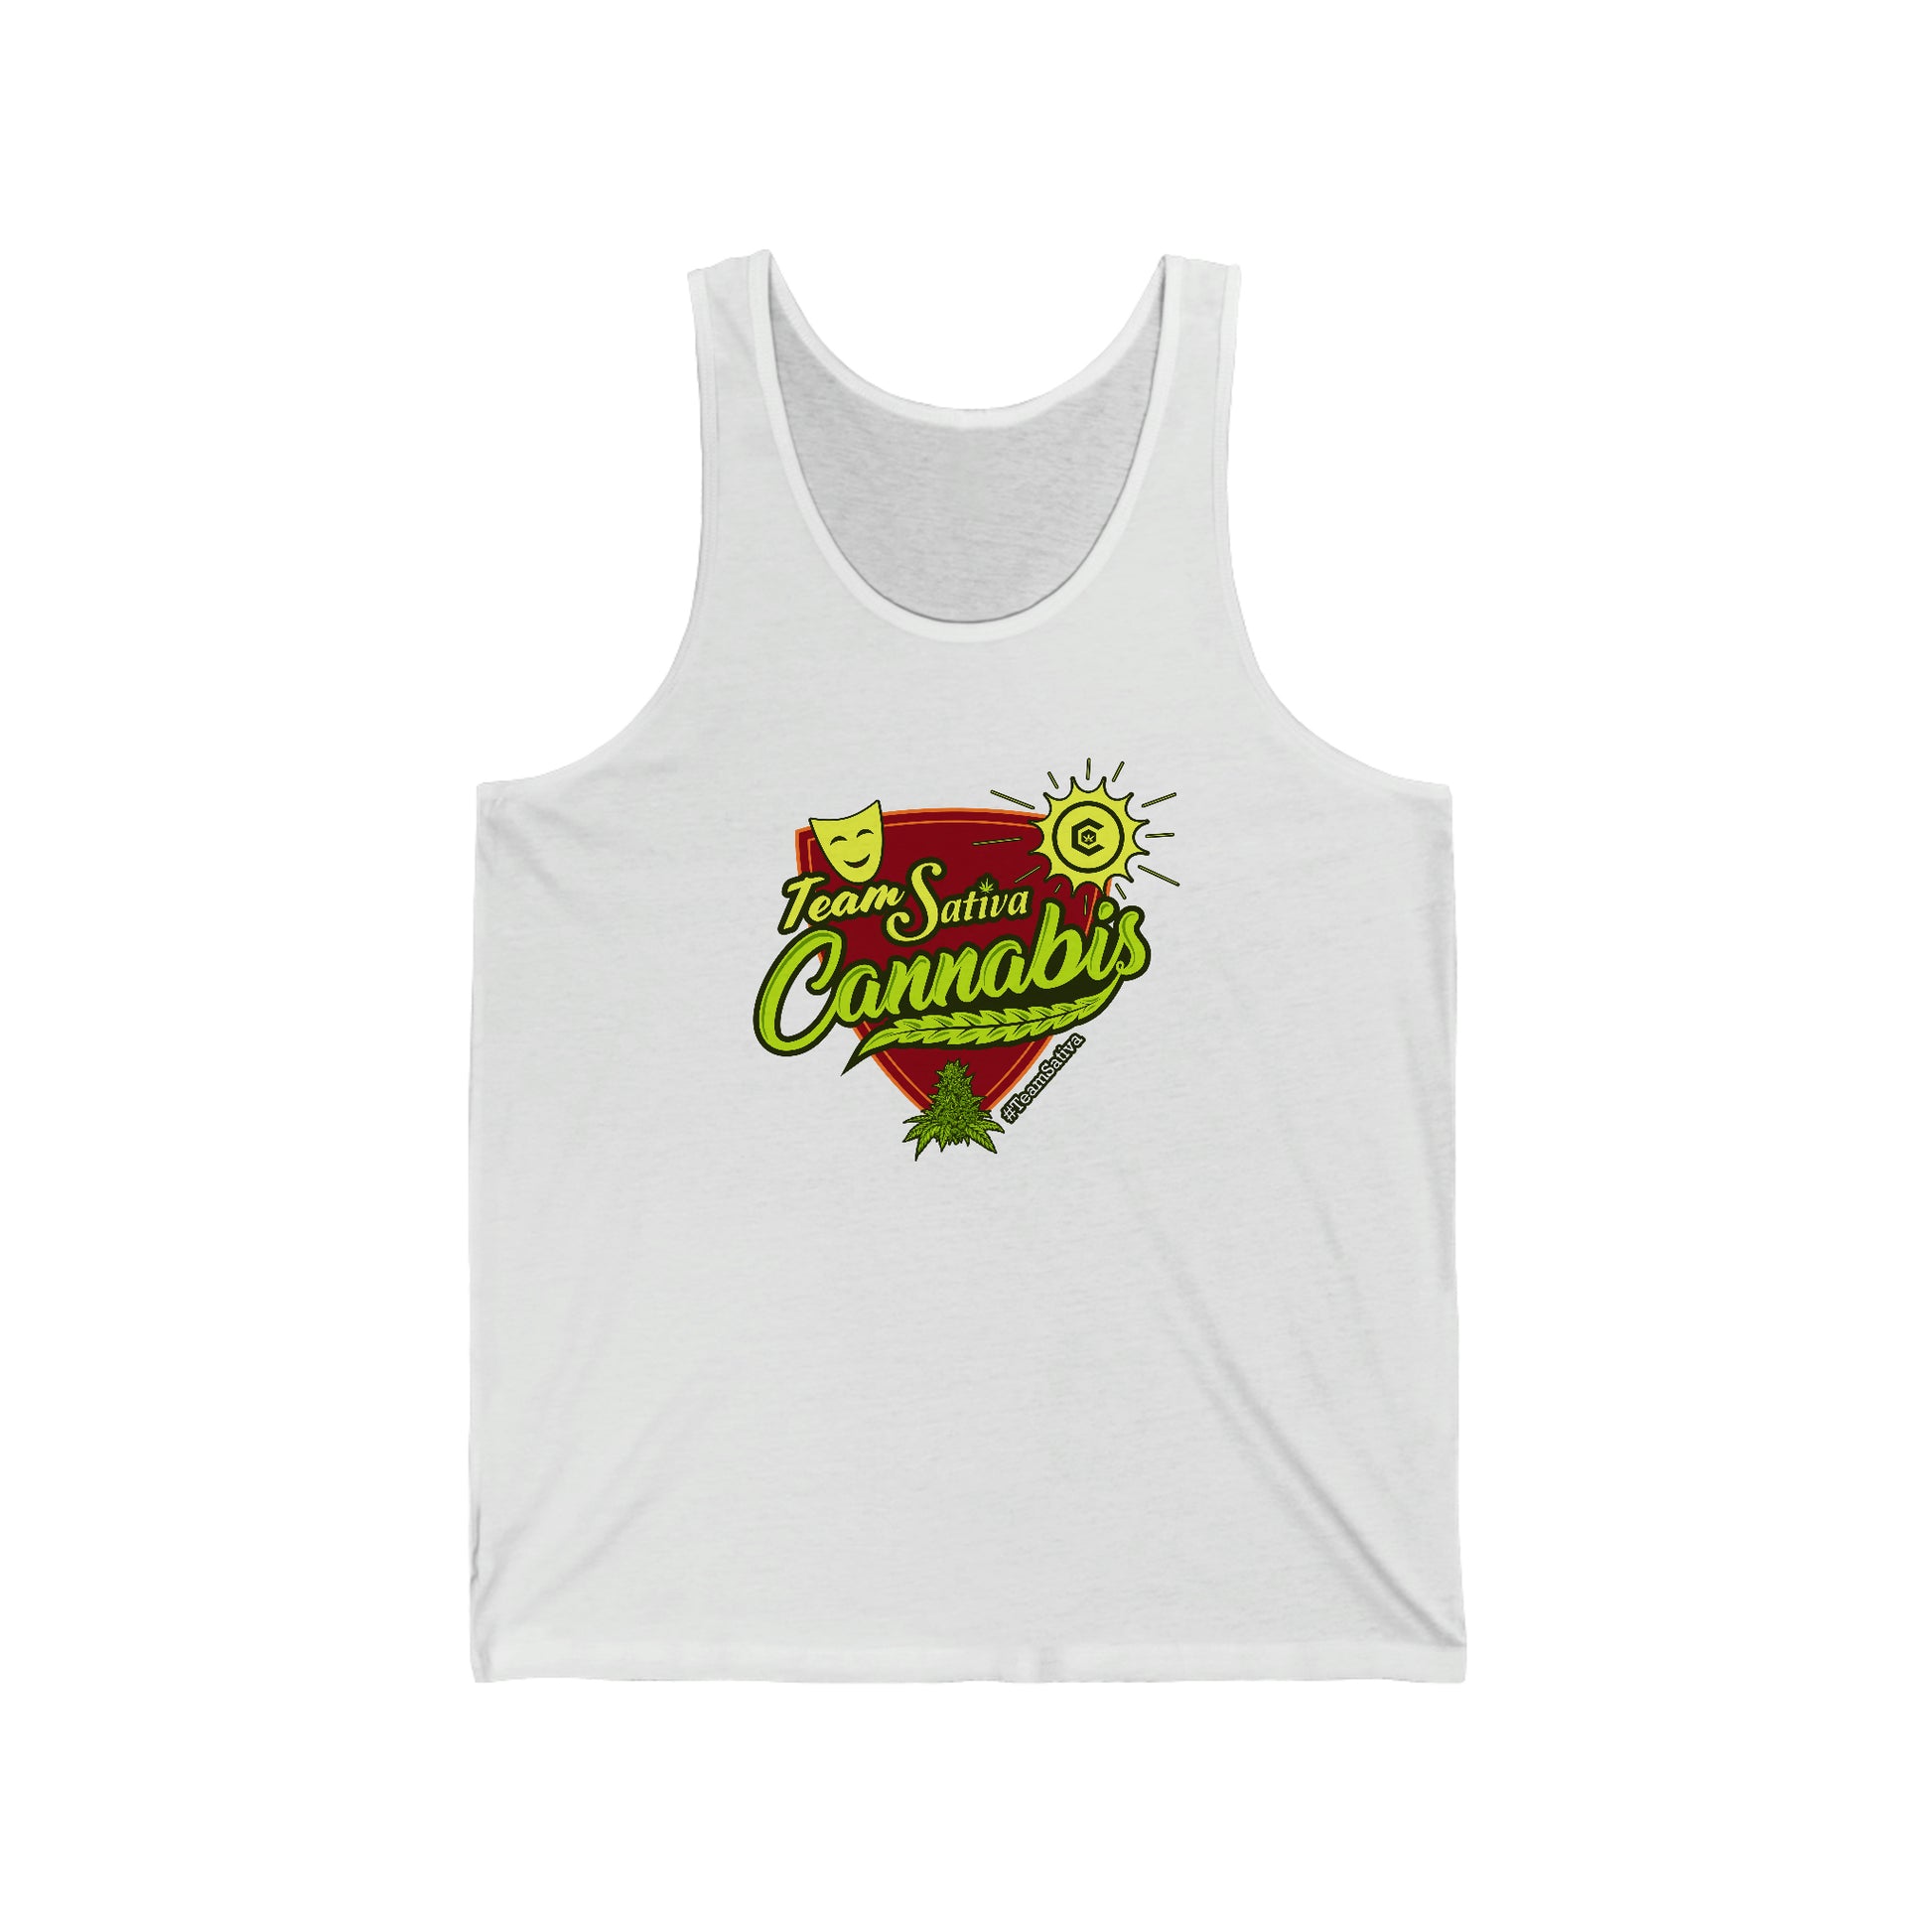 a Team Sativa Cannabis Jersey Tank with a red and green logo on it.